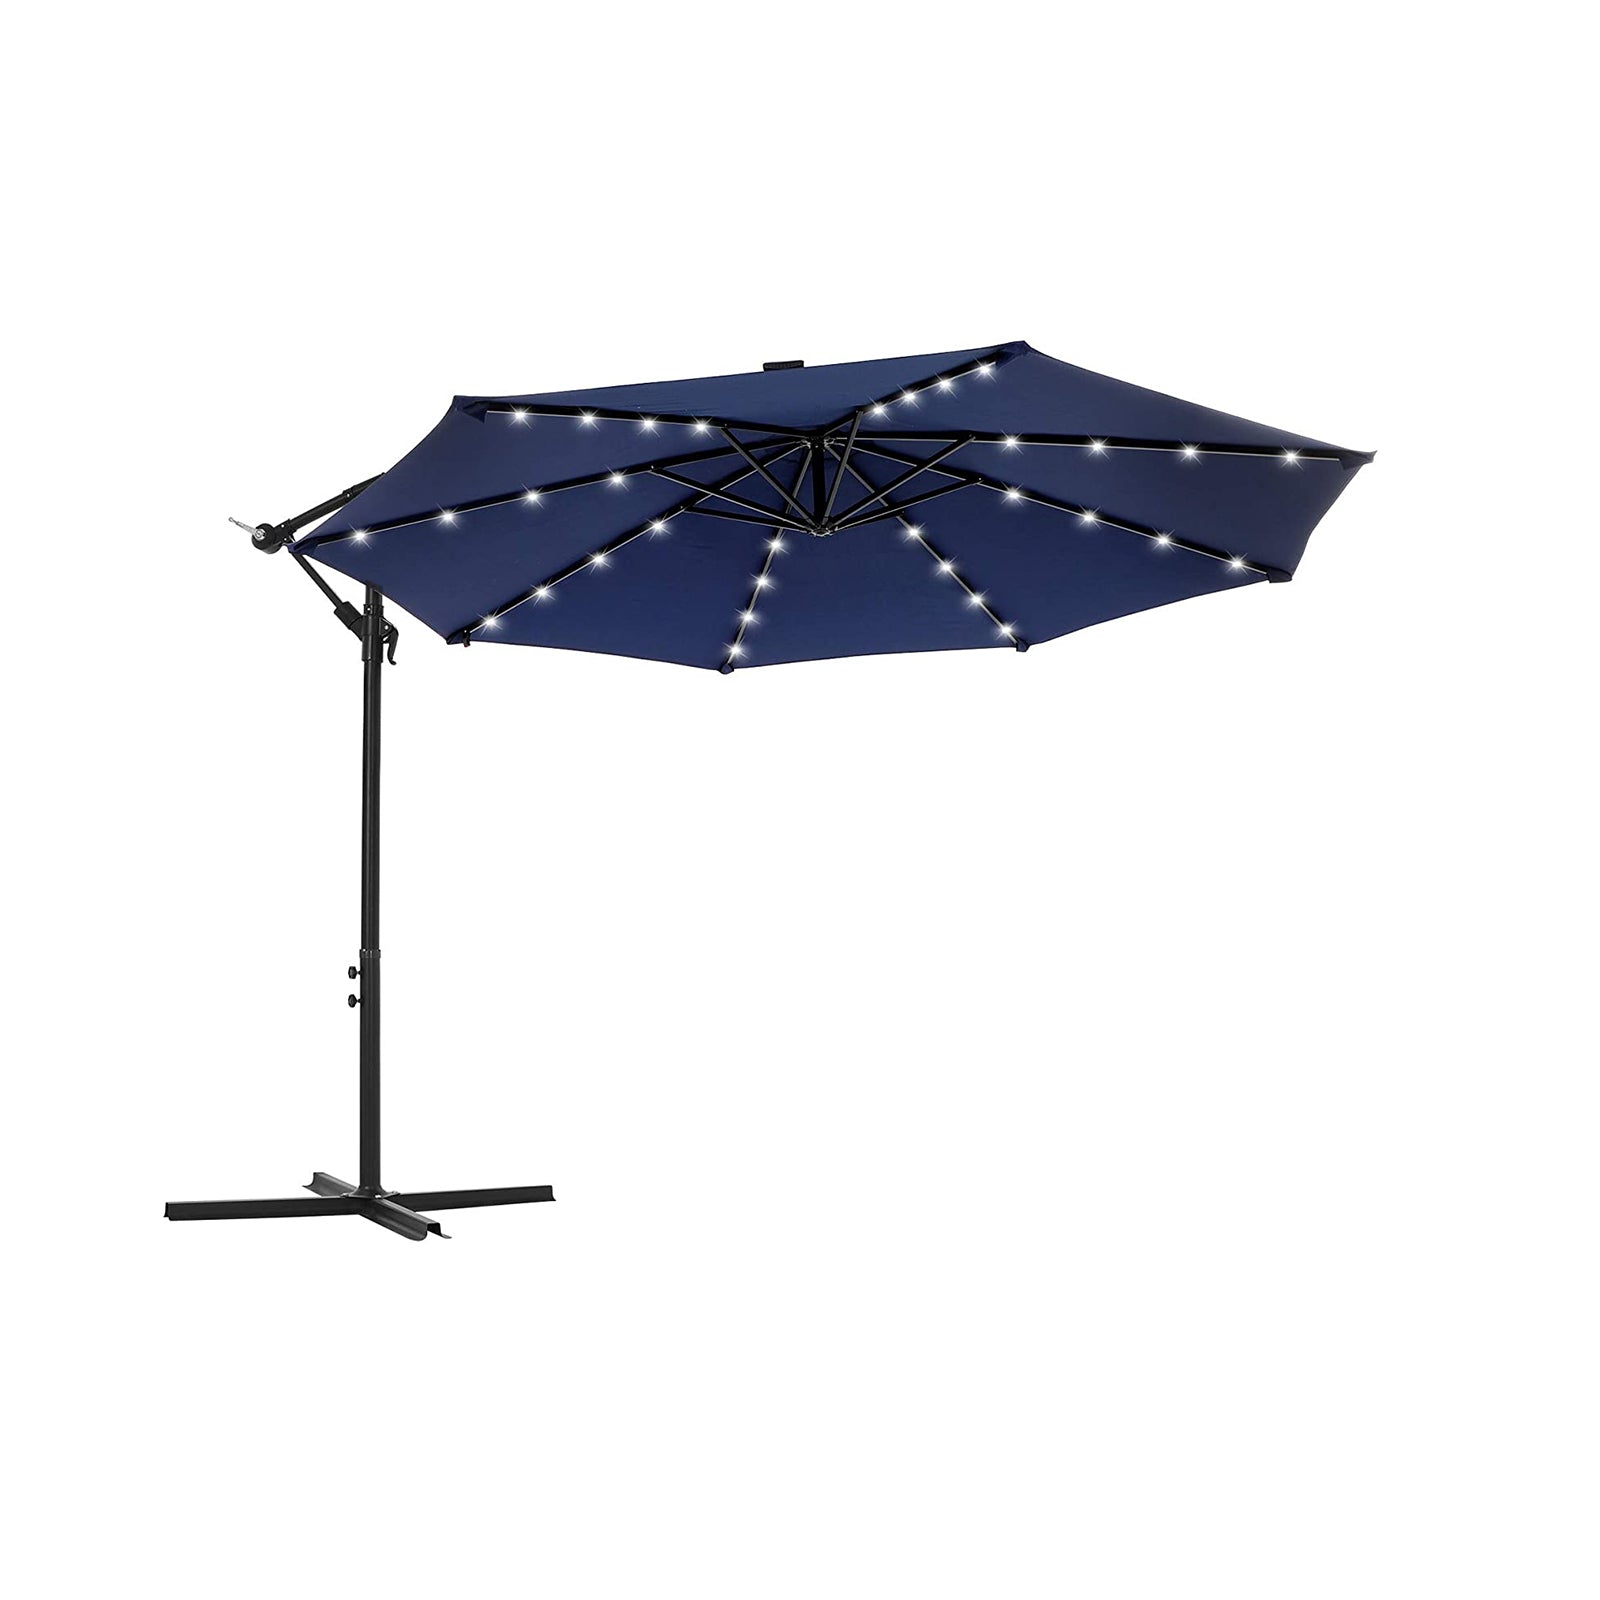 SONGMICS Outdoor Umbrella with Solar-Powered LED Lights